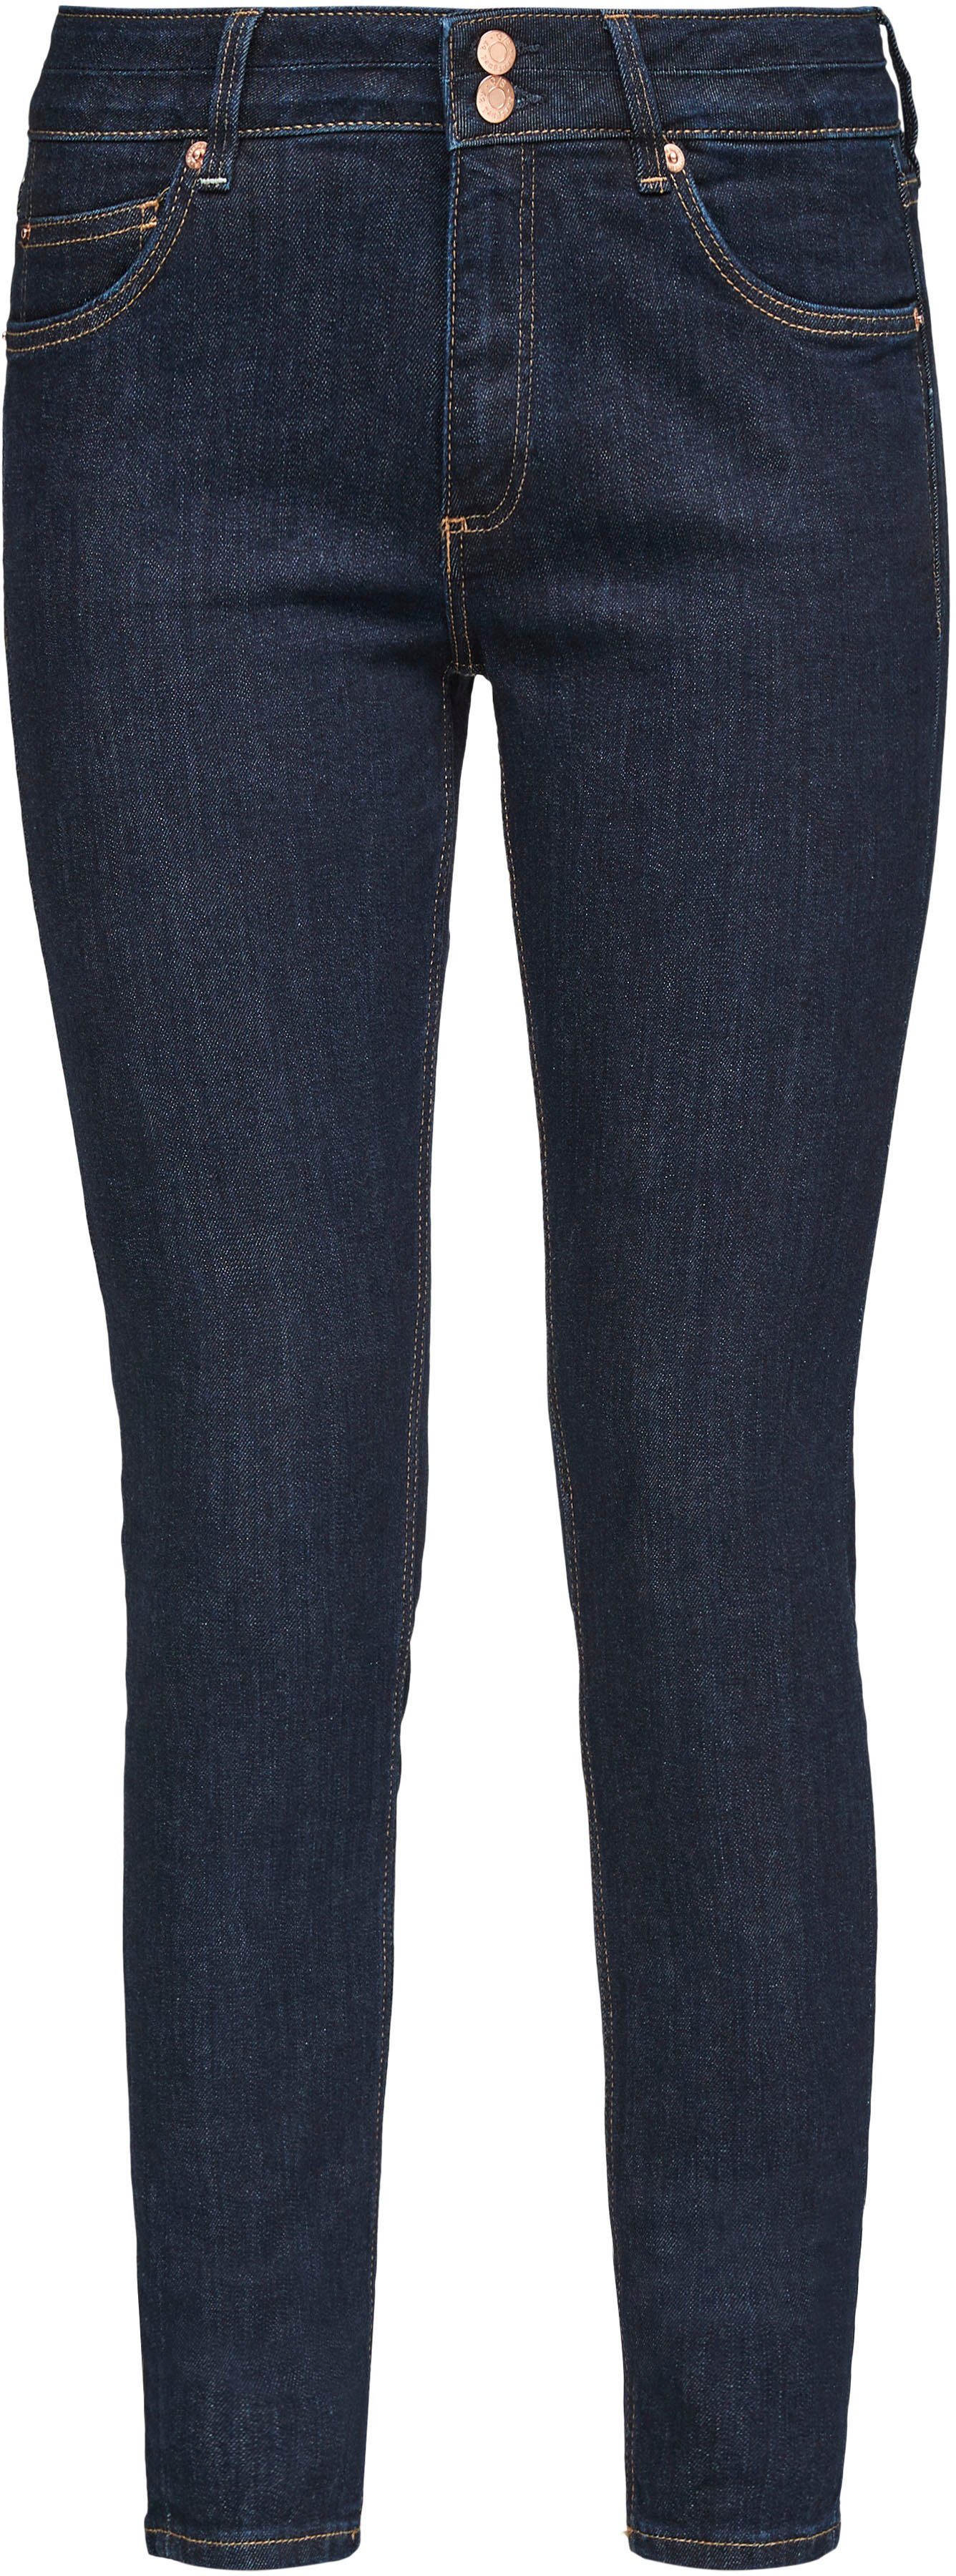 Damen Jeans Q/S by s.Oliver Skinny-fit-Jeans Sadie in cleaner Waschung